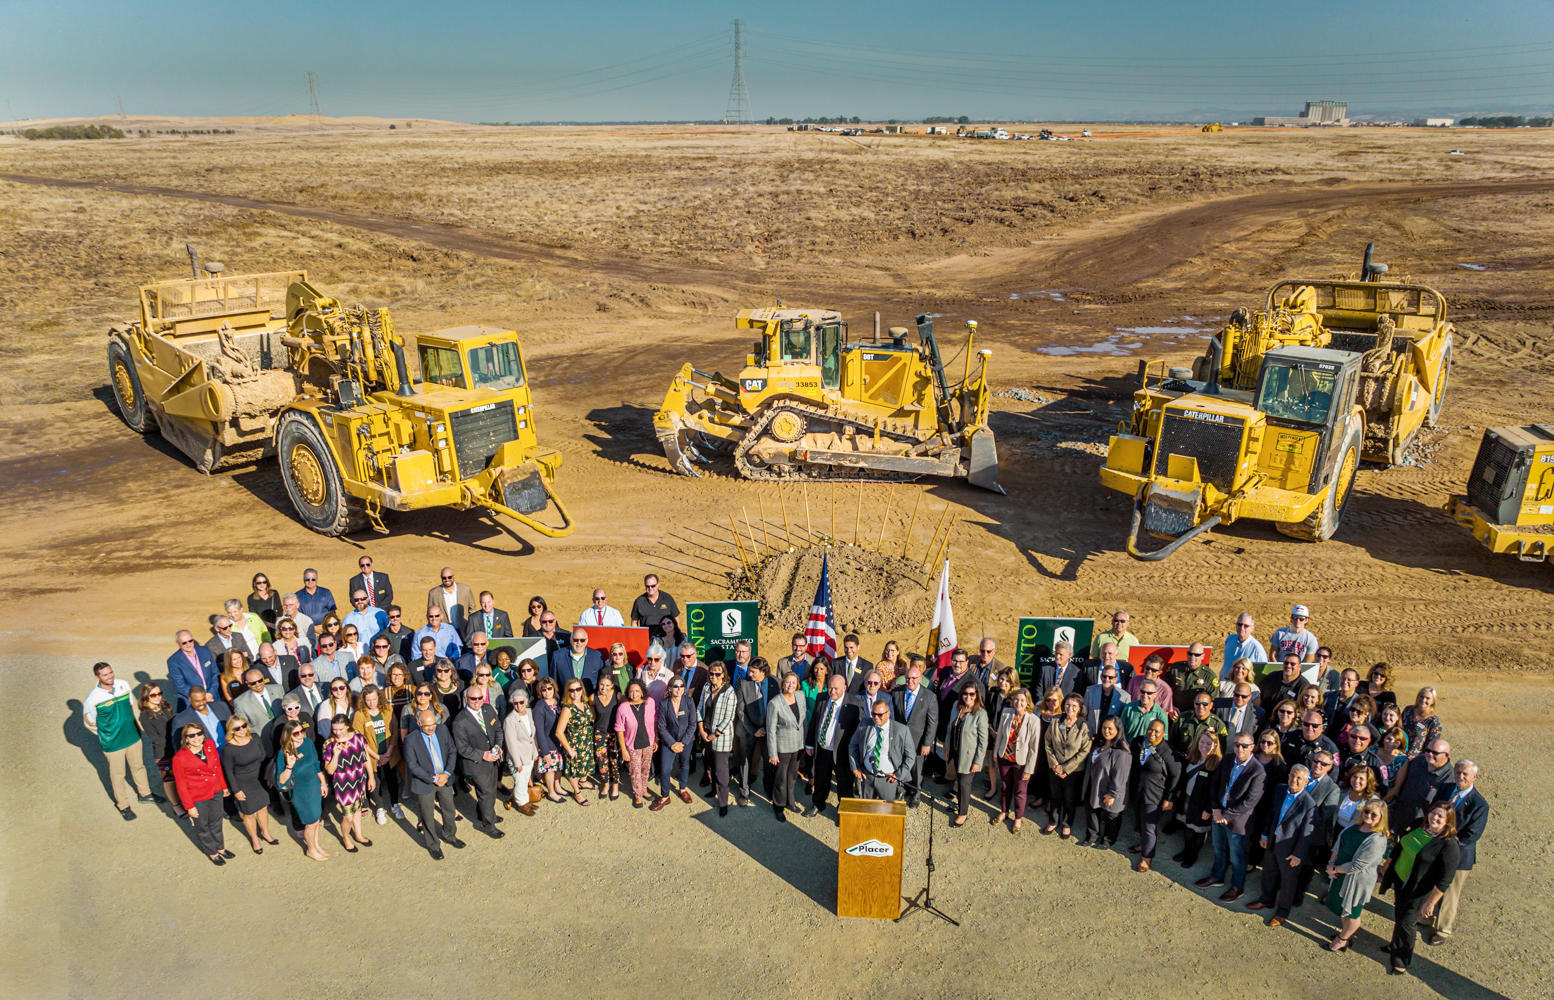 An overhead drone group shot image of the attendees of a recent Placer One groundbreaking ceremony along with a line of construction vehicles behind them.